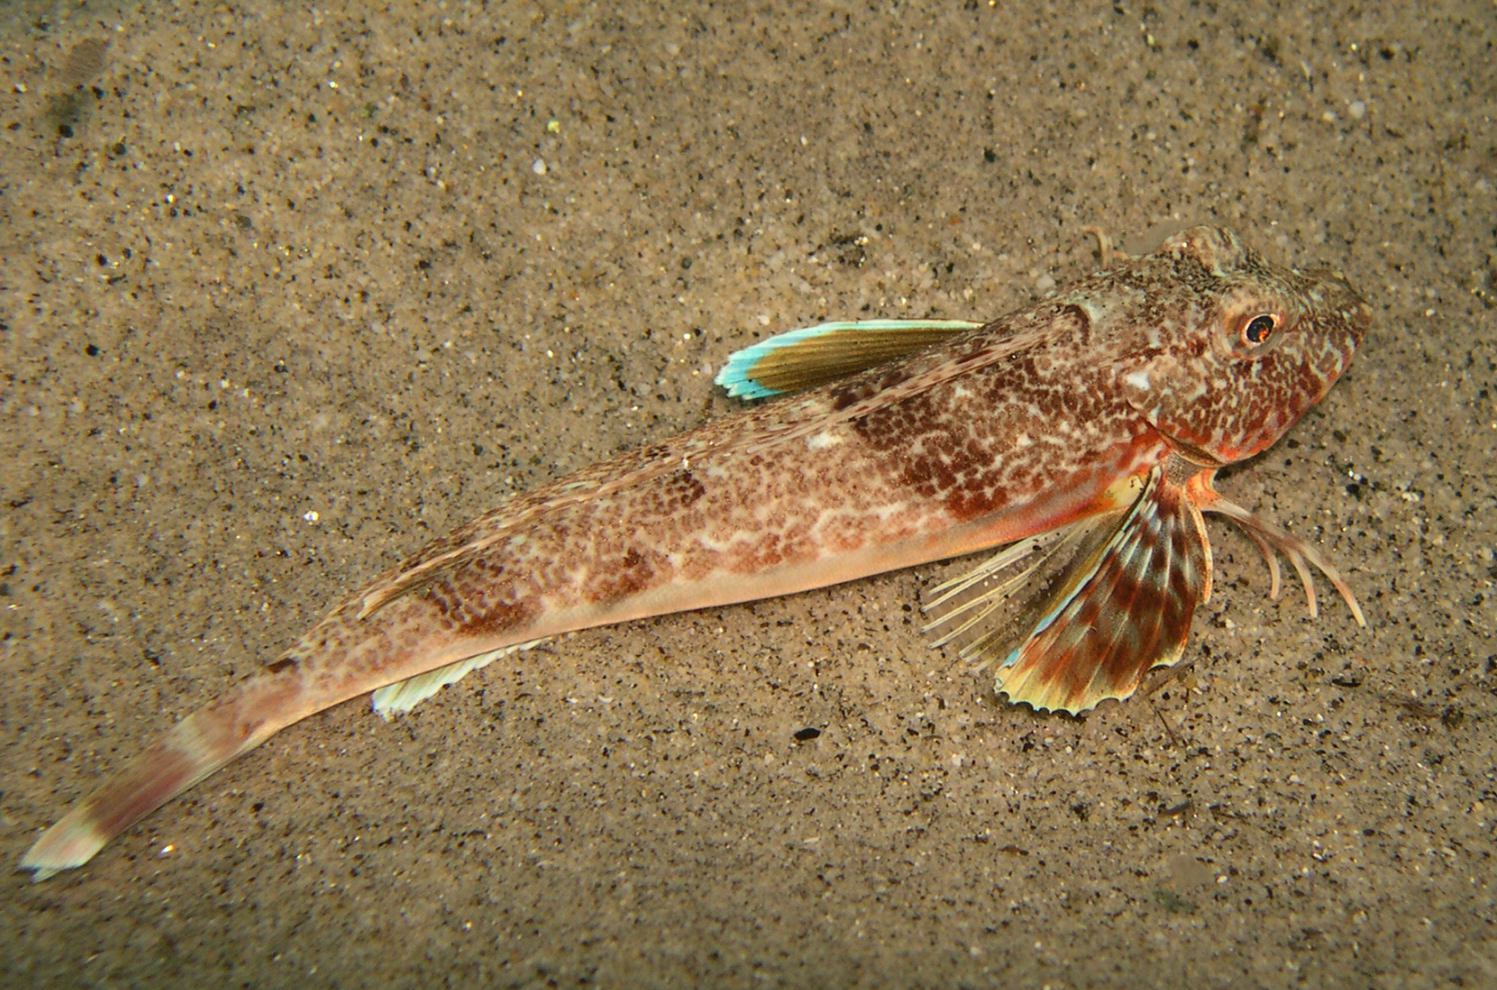 Chelidonichthys obscurus